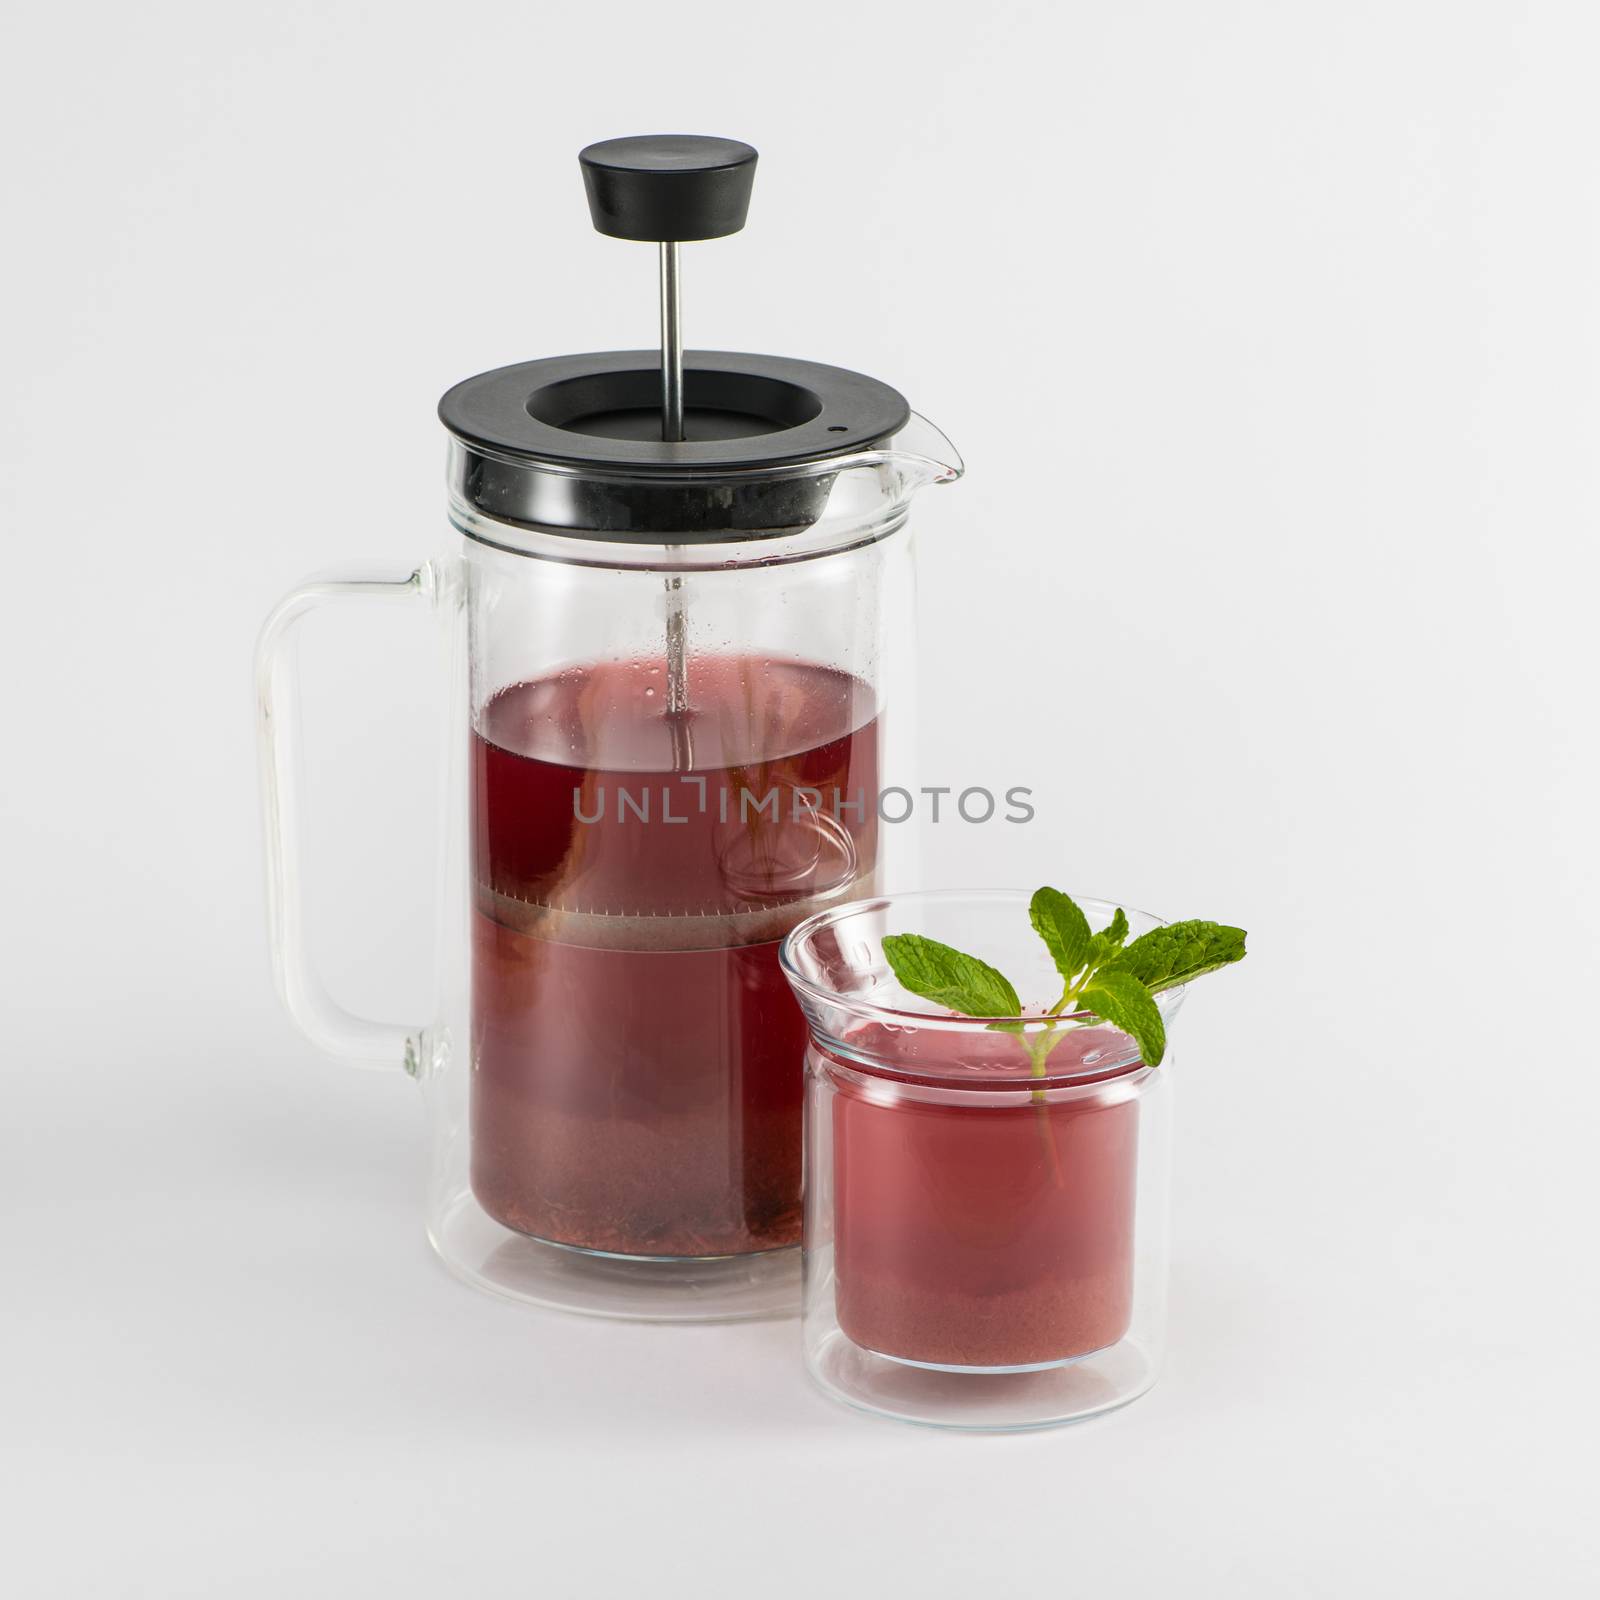 transparent teapot with fruit drink and glass with mint on white background, isolated. piston teapot